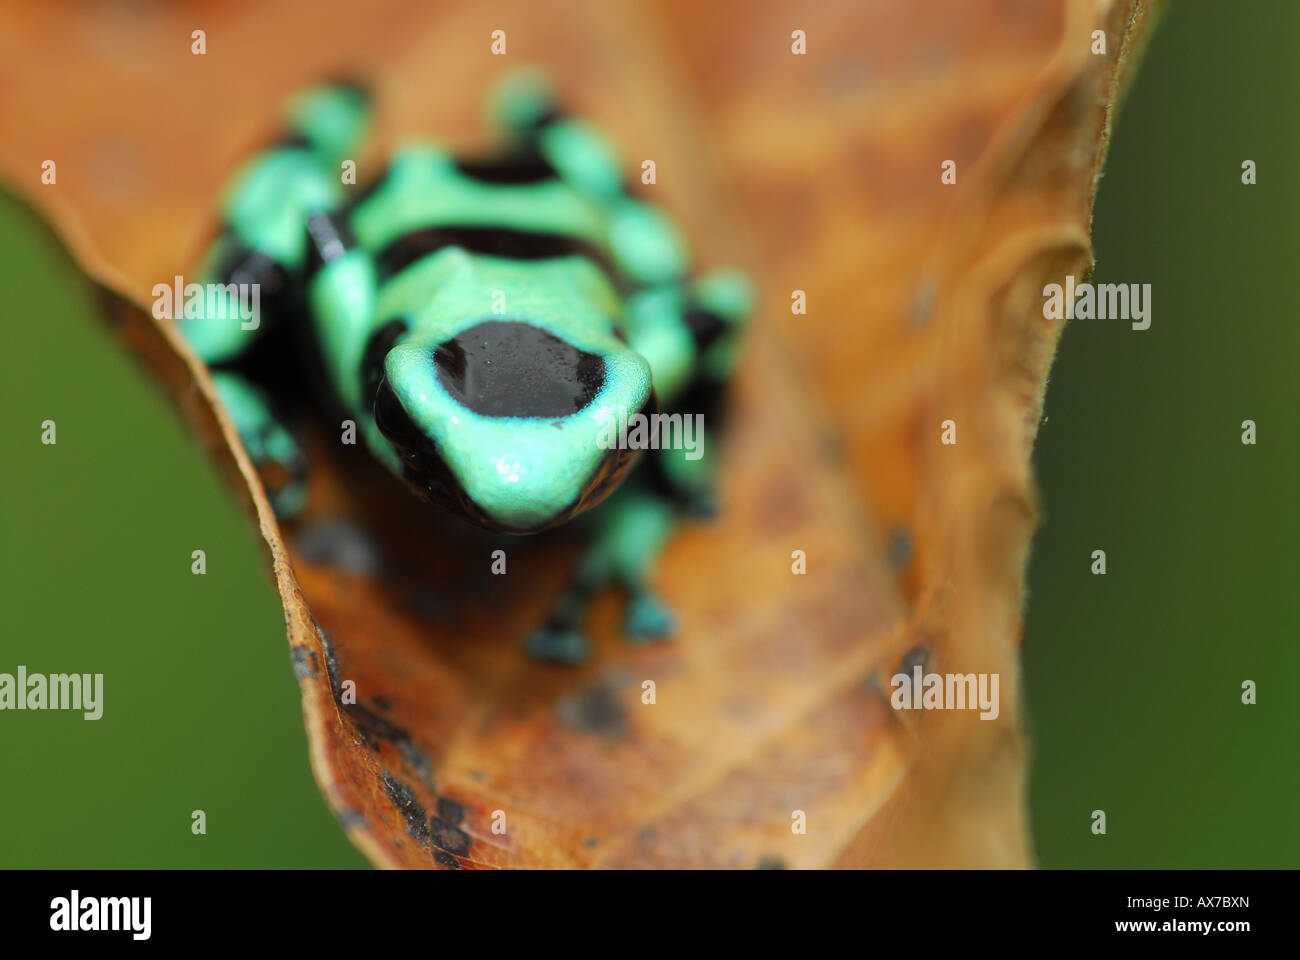 green and black poison dart frog Stock Photo